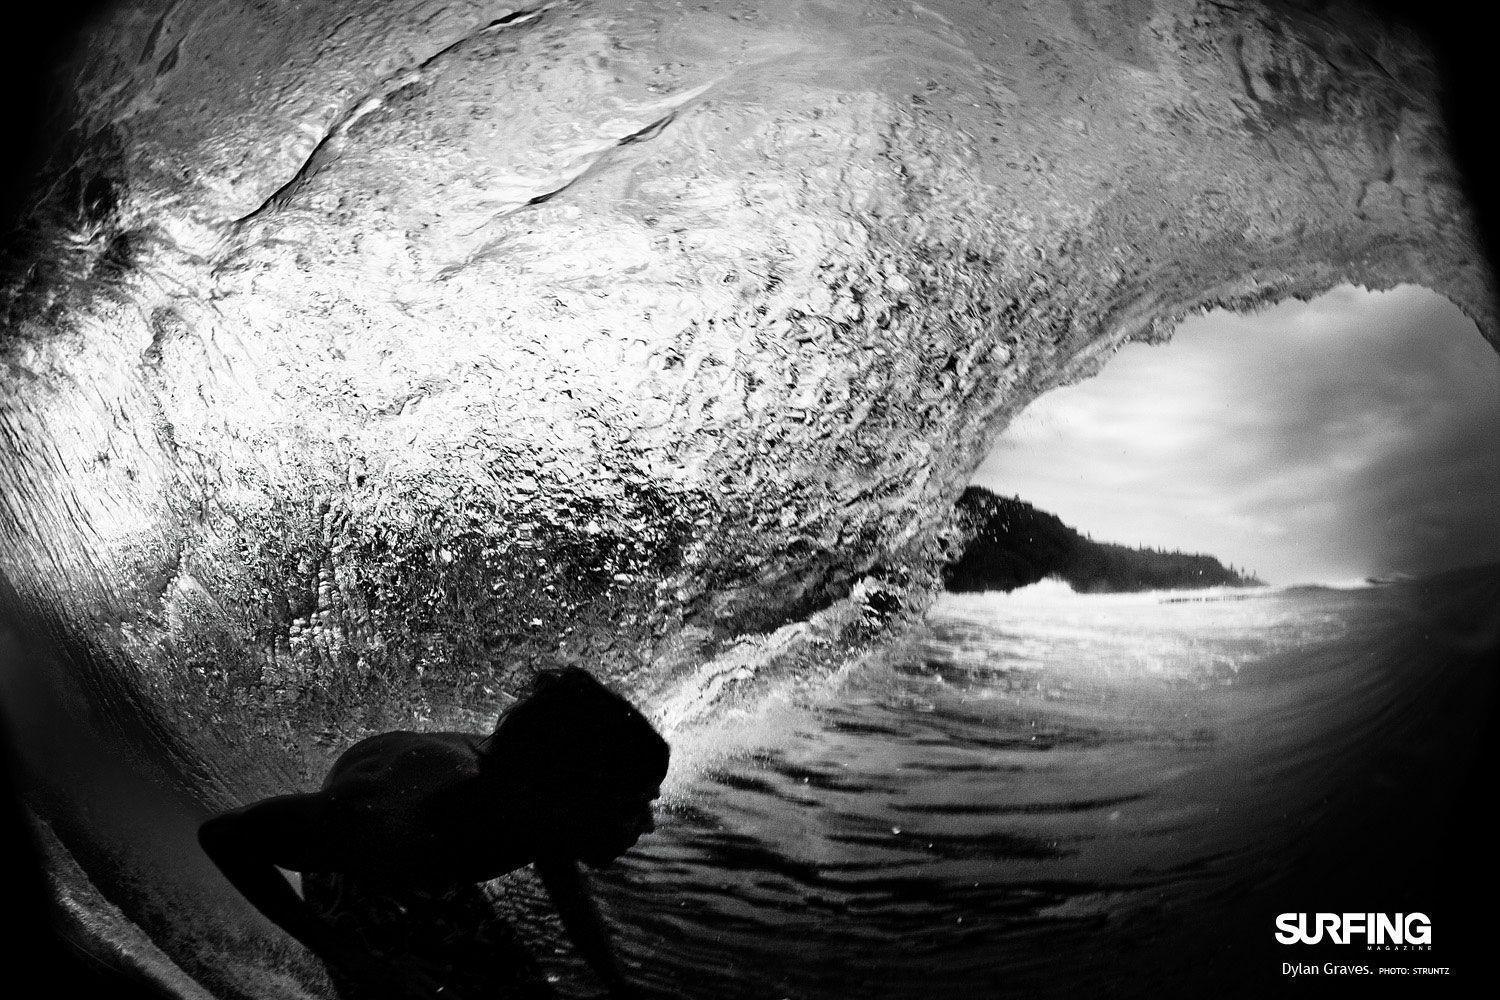 Desktop Wallpaper Awesome Photo From Surfing Magazine. SURFBANG